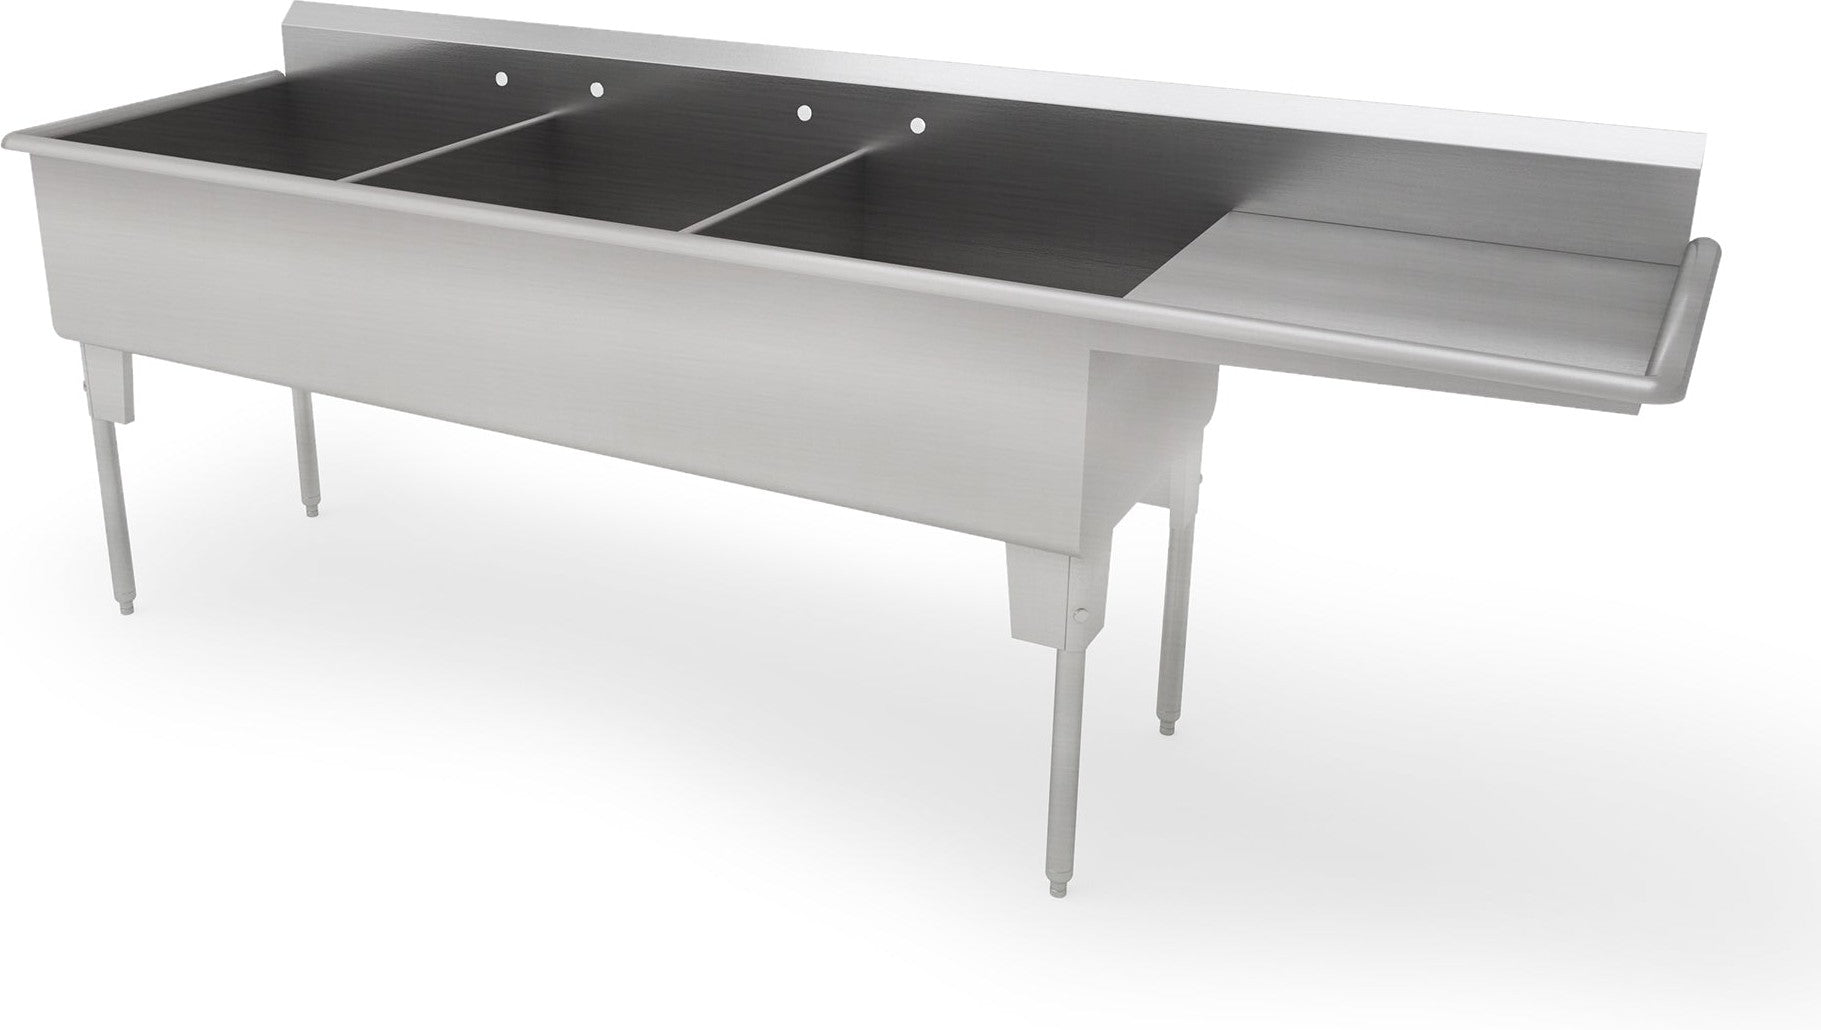 Franesse - 24" x 20" x 14" Triple Compartment Sink With Drainboard - T2460-14-DBL24-O